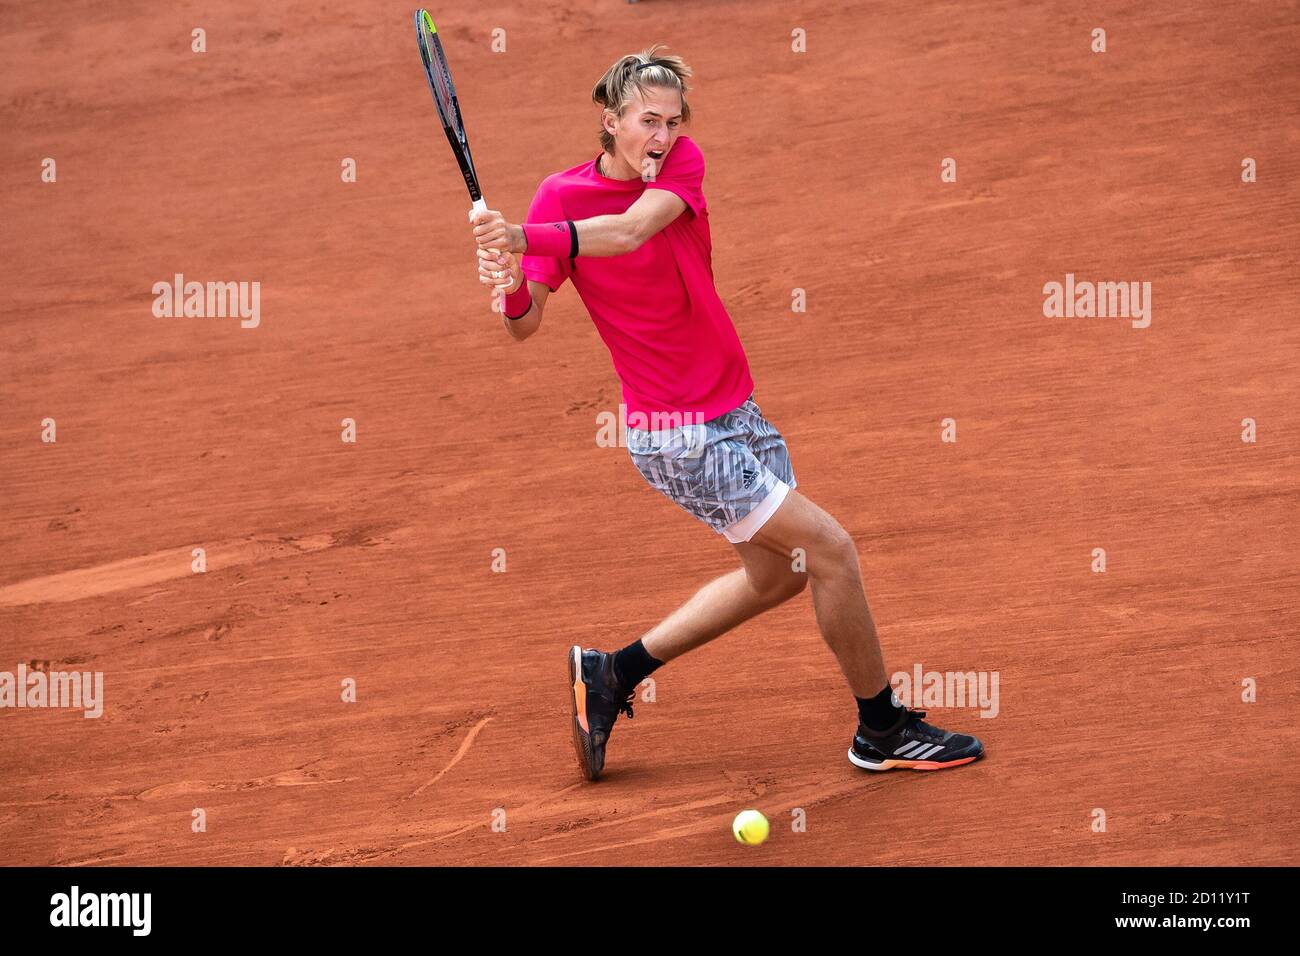 Paris, France. 4th Oct, 2020. Sebastian Korda competes during the men's singles 4th round match between Rafael Nadal of Spain and Sebastian Korda of the United States at the French Open tennis tournament 2020 at Roland Garros in Paris, France, Oct. 4, 2020. Credit: Aurelien Morissard/Xinhua/Alamy Live News Stock Photo